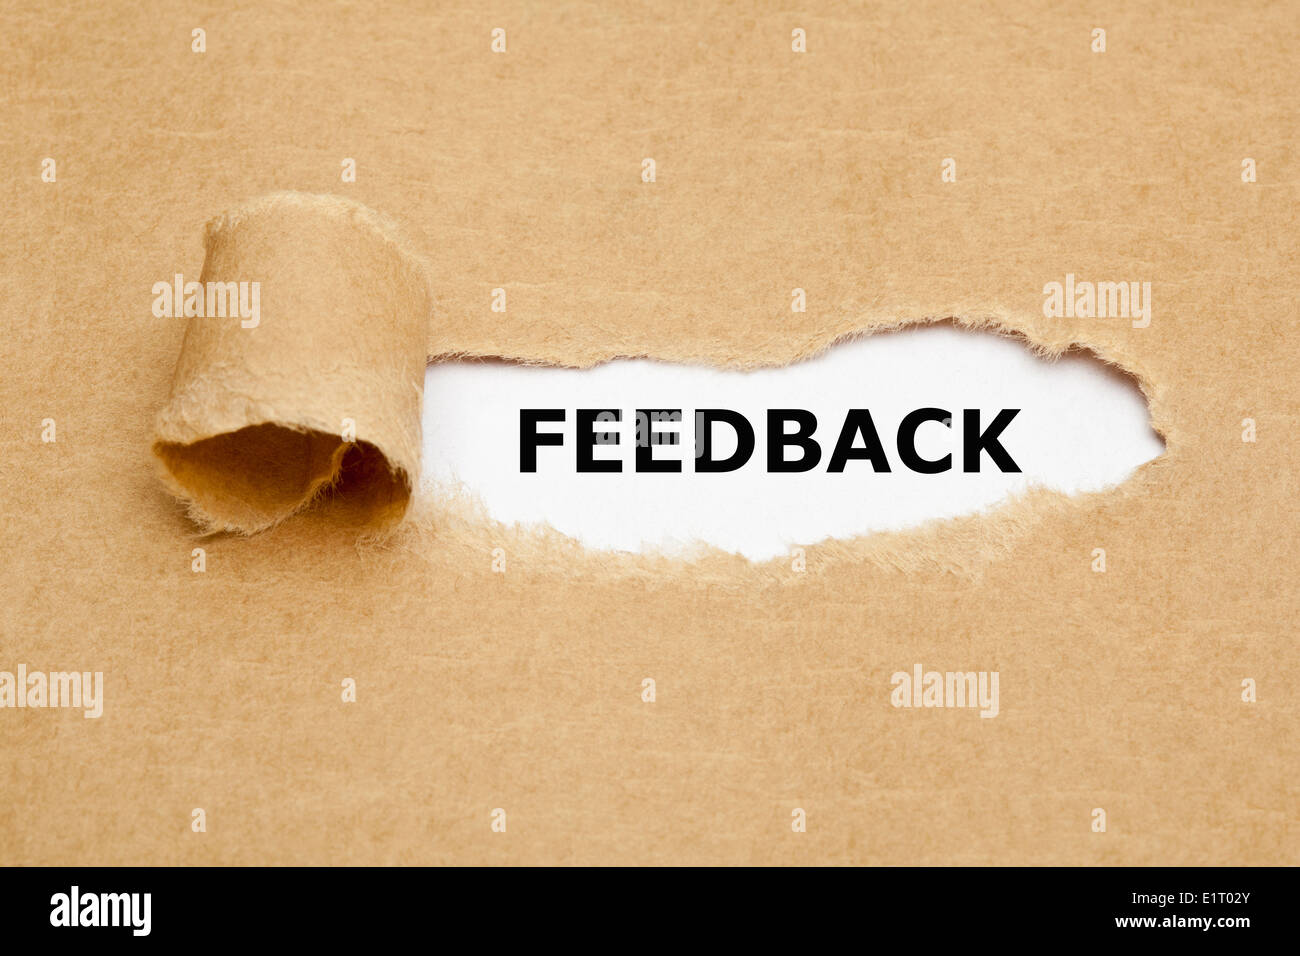 The word Feedback appearing behind torn brown paper. Stock Photo